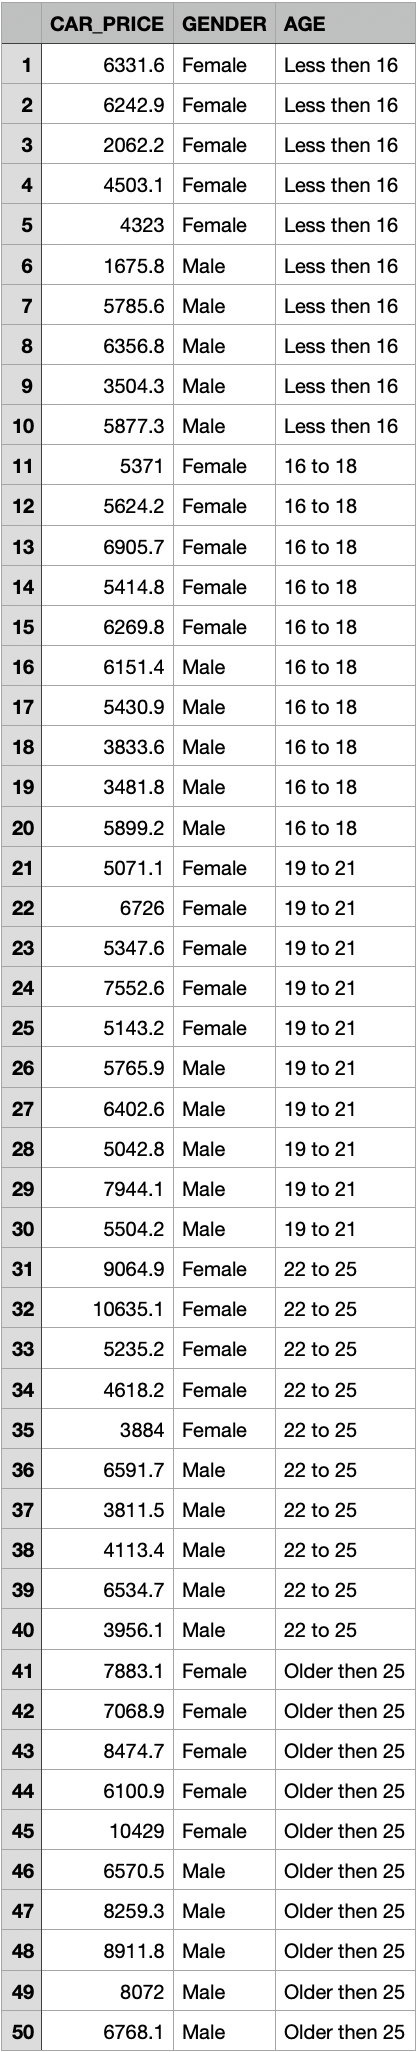 CAR_PRICE GENDER AGE
1
6331.6 Female
Less then 16
2
6242.9 Female
Less then 16
3
2062.2 Female
Less then 16
4
4503.1 Female
Less then 16
4323 Female
Less then 16
6
1675.8 Male
Less then 16
7
5785.6 Male
Less then 16
8
6356.8 Male
Less then 16
3504.3 Male
Less then 16
10
5877.3 Male
Less then 16
11
5371 Female
16 to 18
12
5624.2 Female
16 to 18
13
6905.7 Female
16 to 18
14
5414.8 Female
16 to 18
15
6269.8 Female
16 to 18
16
6151.4 Male
16 to 18
17
5430.9 Male
16 to 18
18
3833.6 Male
16 to 18
19
3481.8 Male
16 to 18
20
5899.2 Male
16 to 18
21
5071.1 Female
19 to 21
22
6726 Female
19 to 21
23
5347.6 Female
19 to 21
24
7552.6 Female
19 to 21
25
5143.2 Female
19 to 21
26
5765.9 Male
19 to 21
27
6402.6 Male
19 to 21
28
5042.8 Male
19 to 21
29
7944.1 Male
19 to 21
30
5504.2 Male
19 to 21
31
9064.9 Female
22 to 25
32
10635.1 Female
22 to 25
33
5235.2 Female
22 to 25
34
4618.2 Female
22 to 25
35
3884 Female
22 to 25
36
6591.7 Male
22 to 25
37
3811.5 Male
22 to 25
38
4113.4 Male
22 to 25
39
6534.7 Male
22 to 25
40
3956.1 Male
22 to 25
41
7883.1 Female
Older then 25
42
7068.9 Female
Older then 25
43
8474.7 Female
Older then 25
44
6100.9 Female
Older then 25
45
10429 Female
Older then 25
46
6570.5 Male
Older then 25
47
8259.3 Male
Older then 25
48
8911.8 Male
Older then 25
49
8072 Male
Older then 25
50
6768.1 Male
Older then 25
